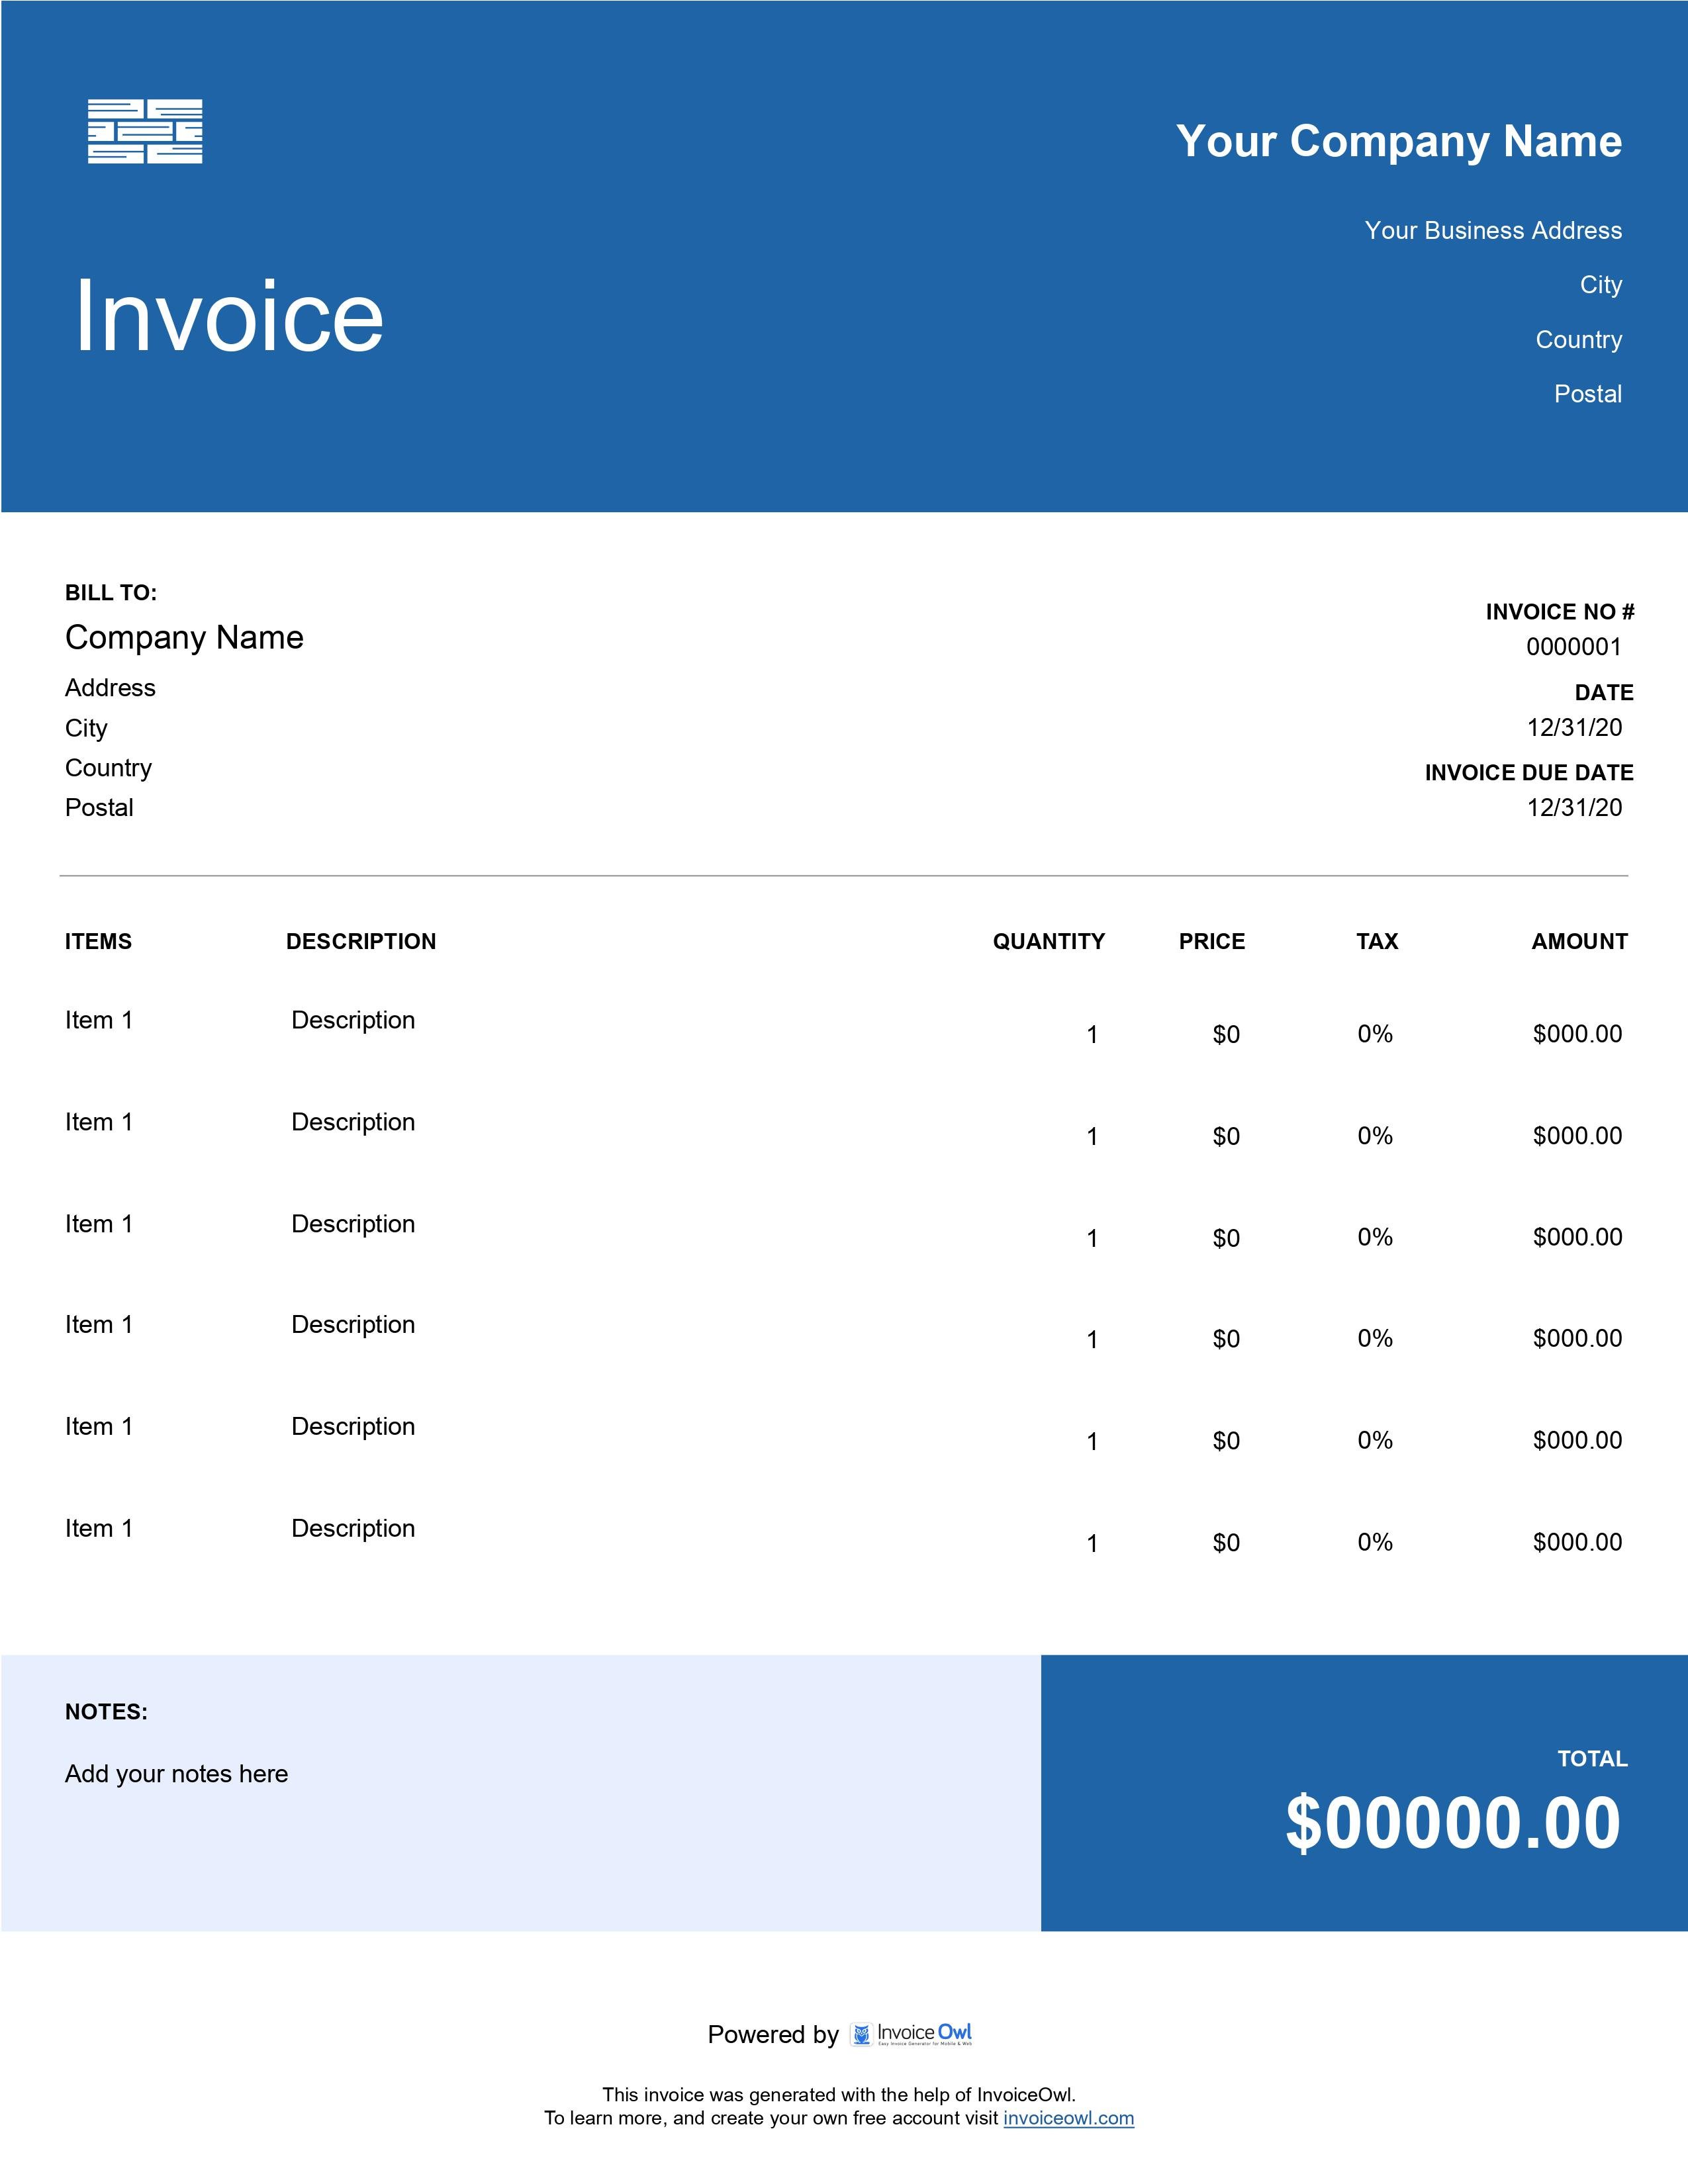 Free Flooring Invoice Template (Word, Excel, and PDF) InvoiceOwl